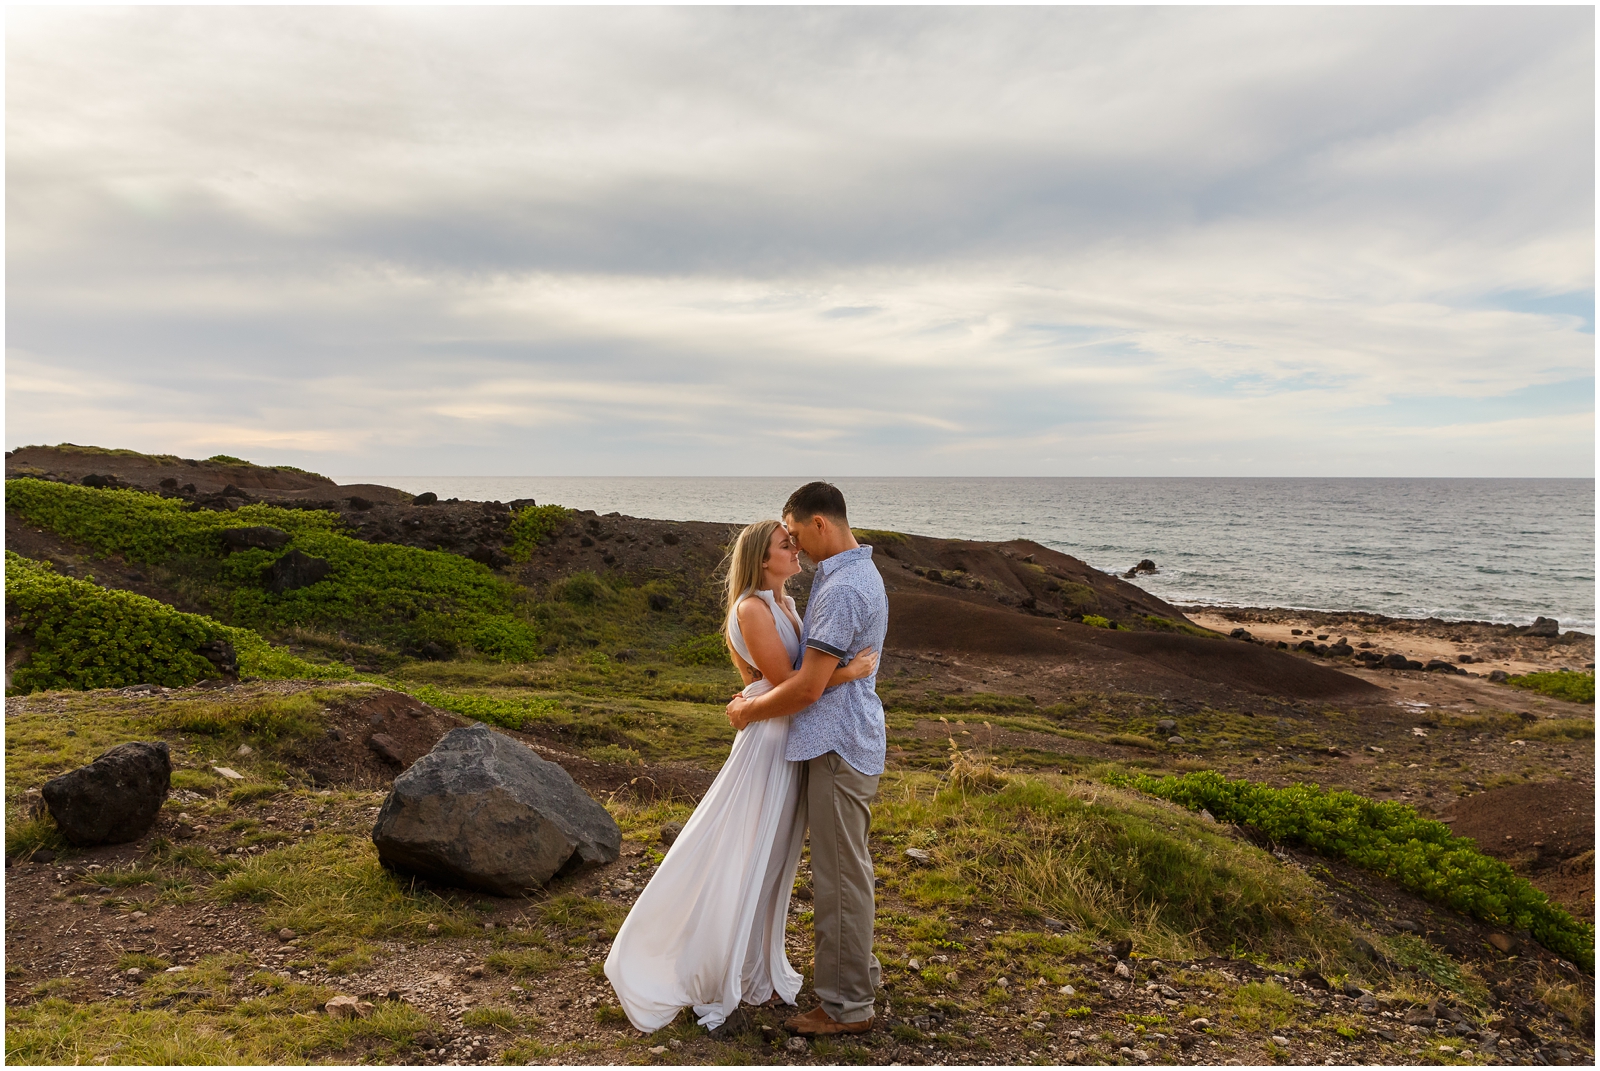 This couple had a small wedding on Oahu's North Shore.